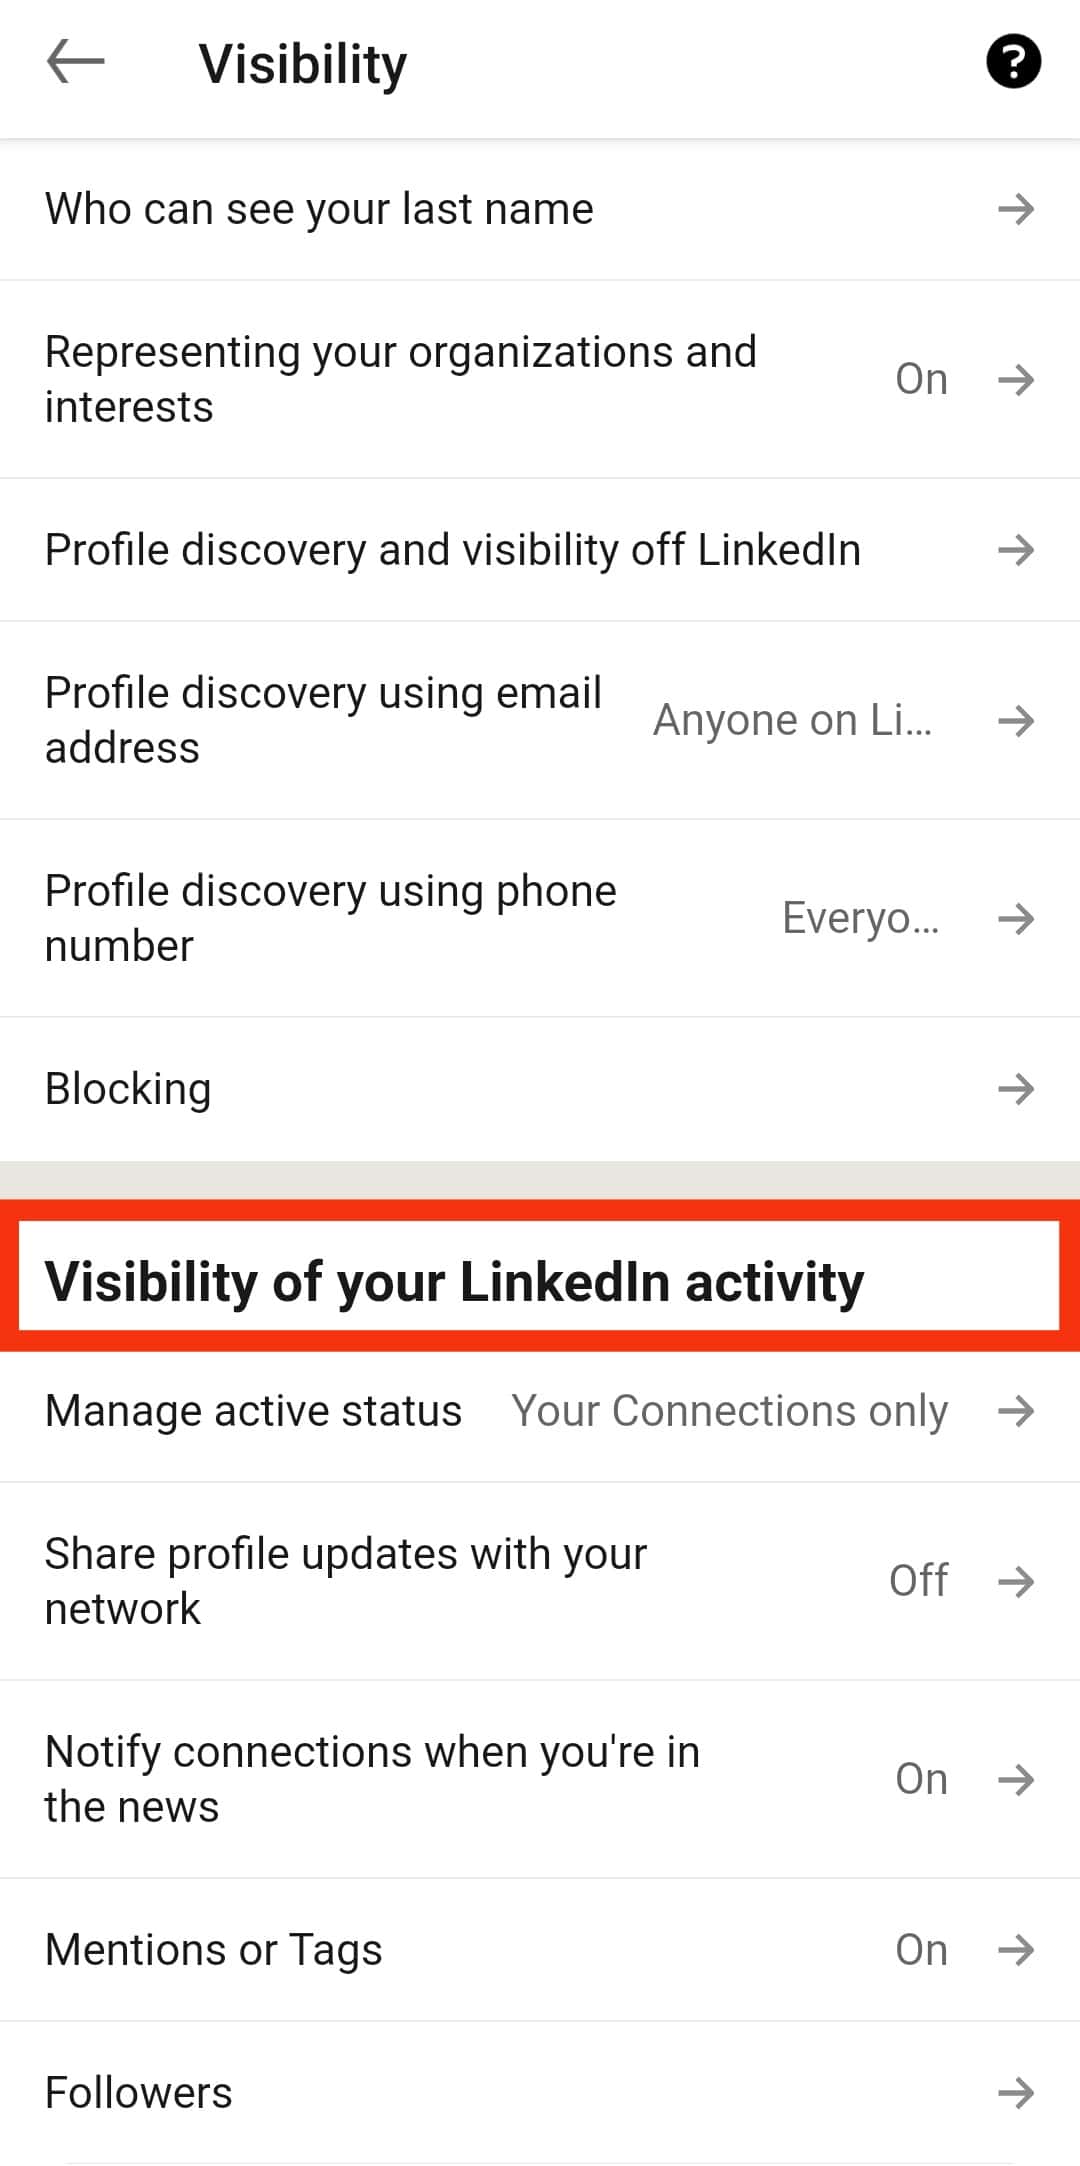 Scroll Down To The Visibility Of Your Linkedin Activity  Section